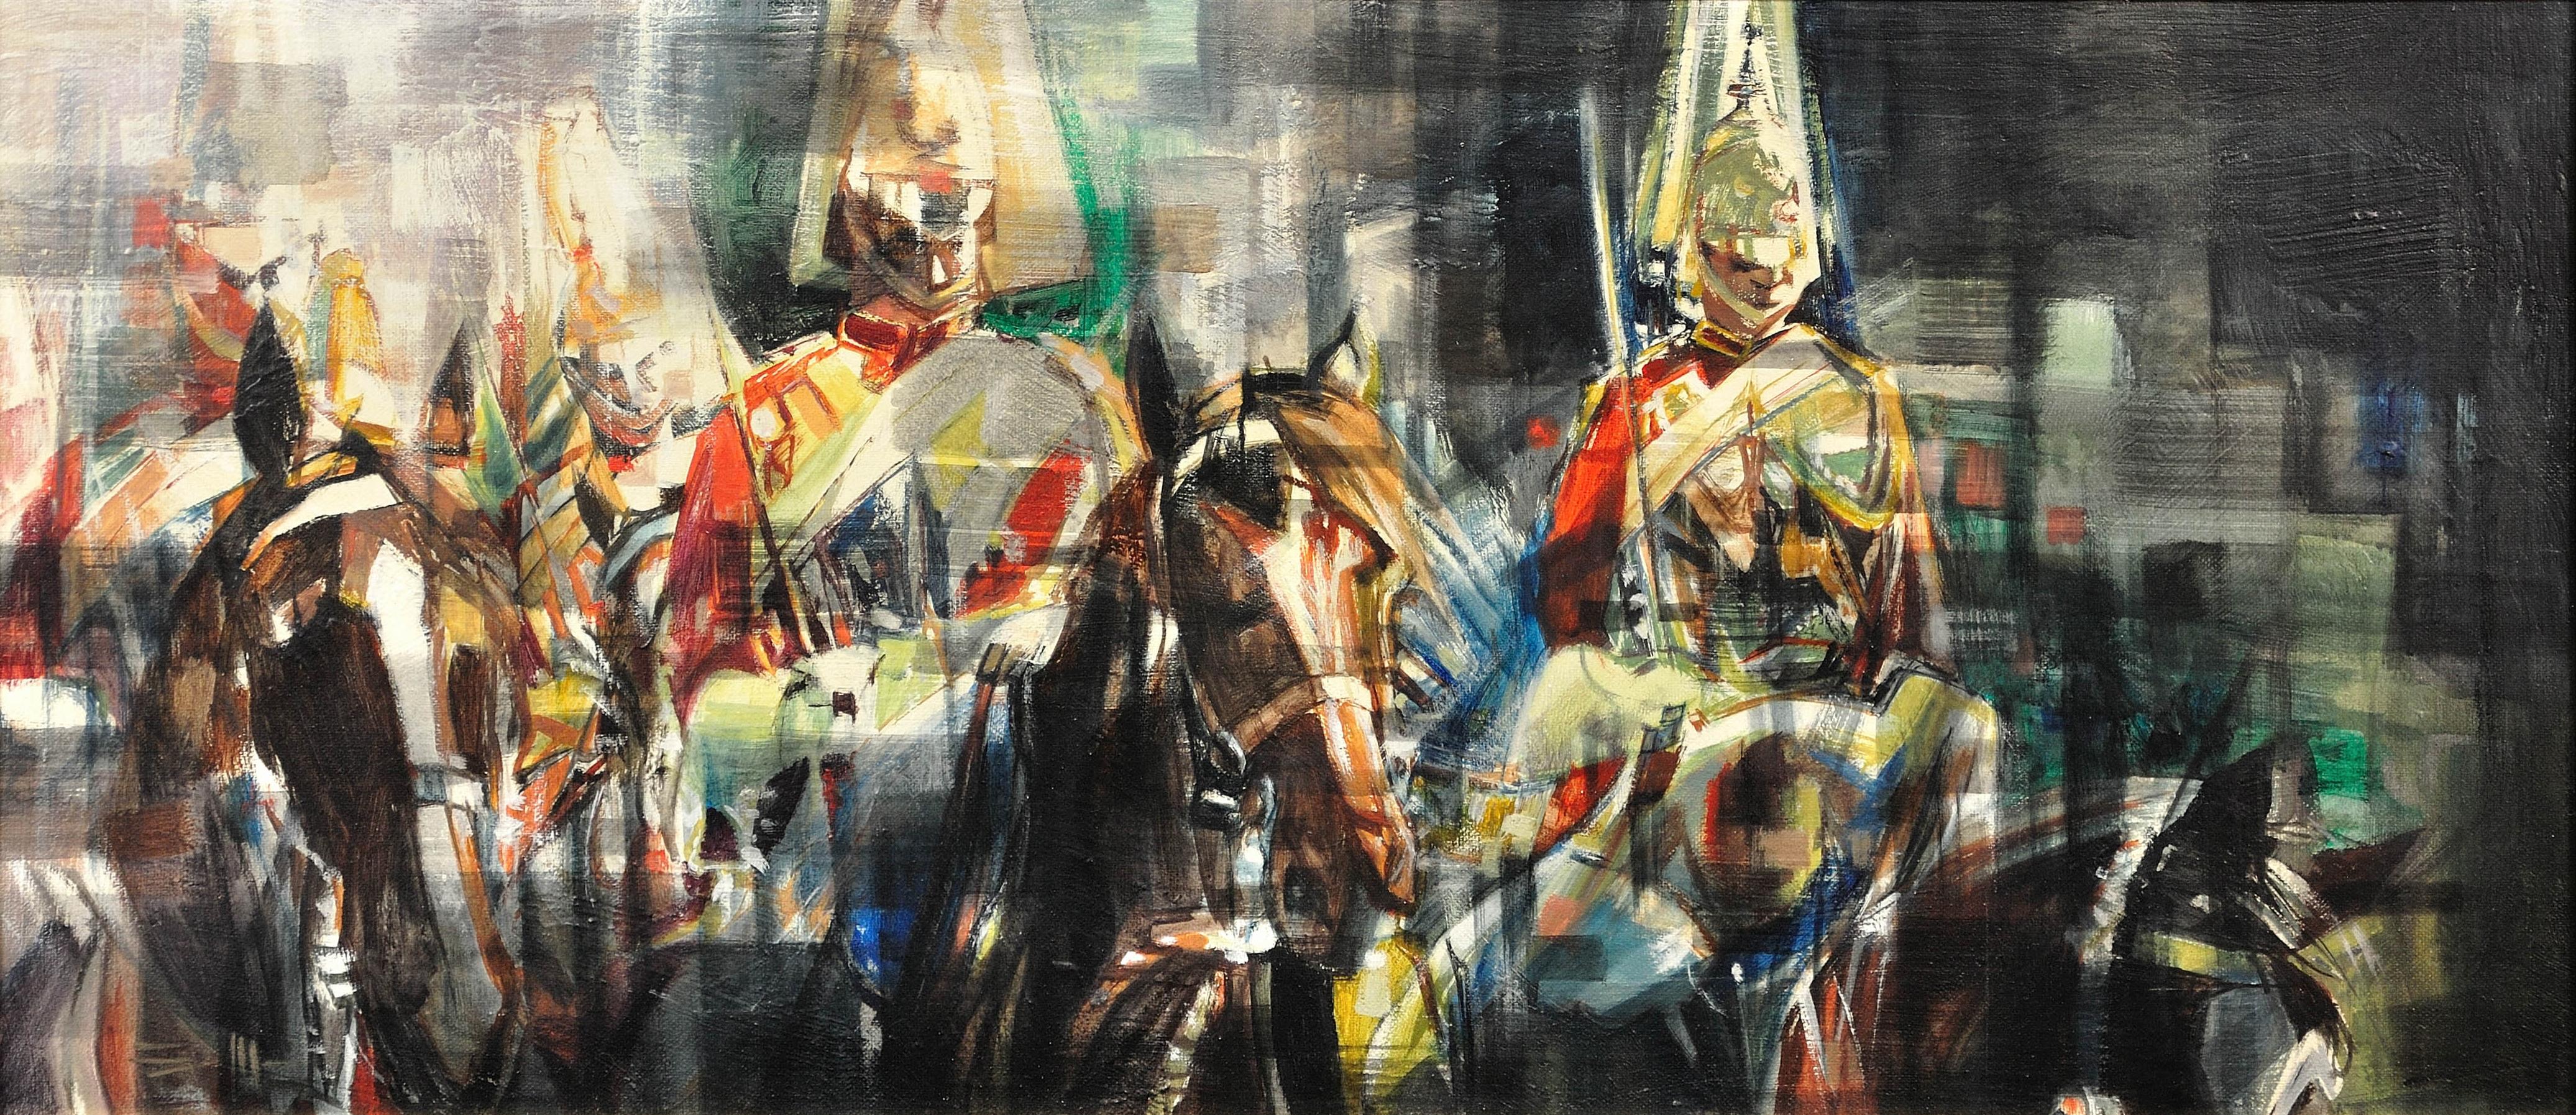 The Household Cavalry. Ceremonial Duty on Horseback. Abstract Motion. On Parade. - Painting by Eric Mason